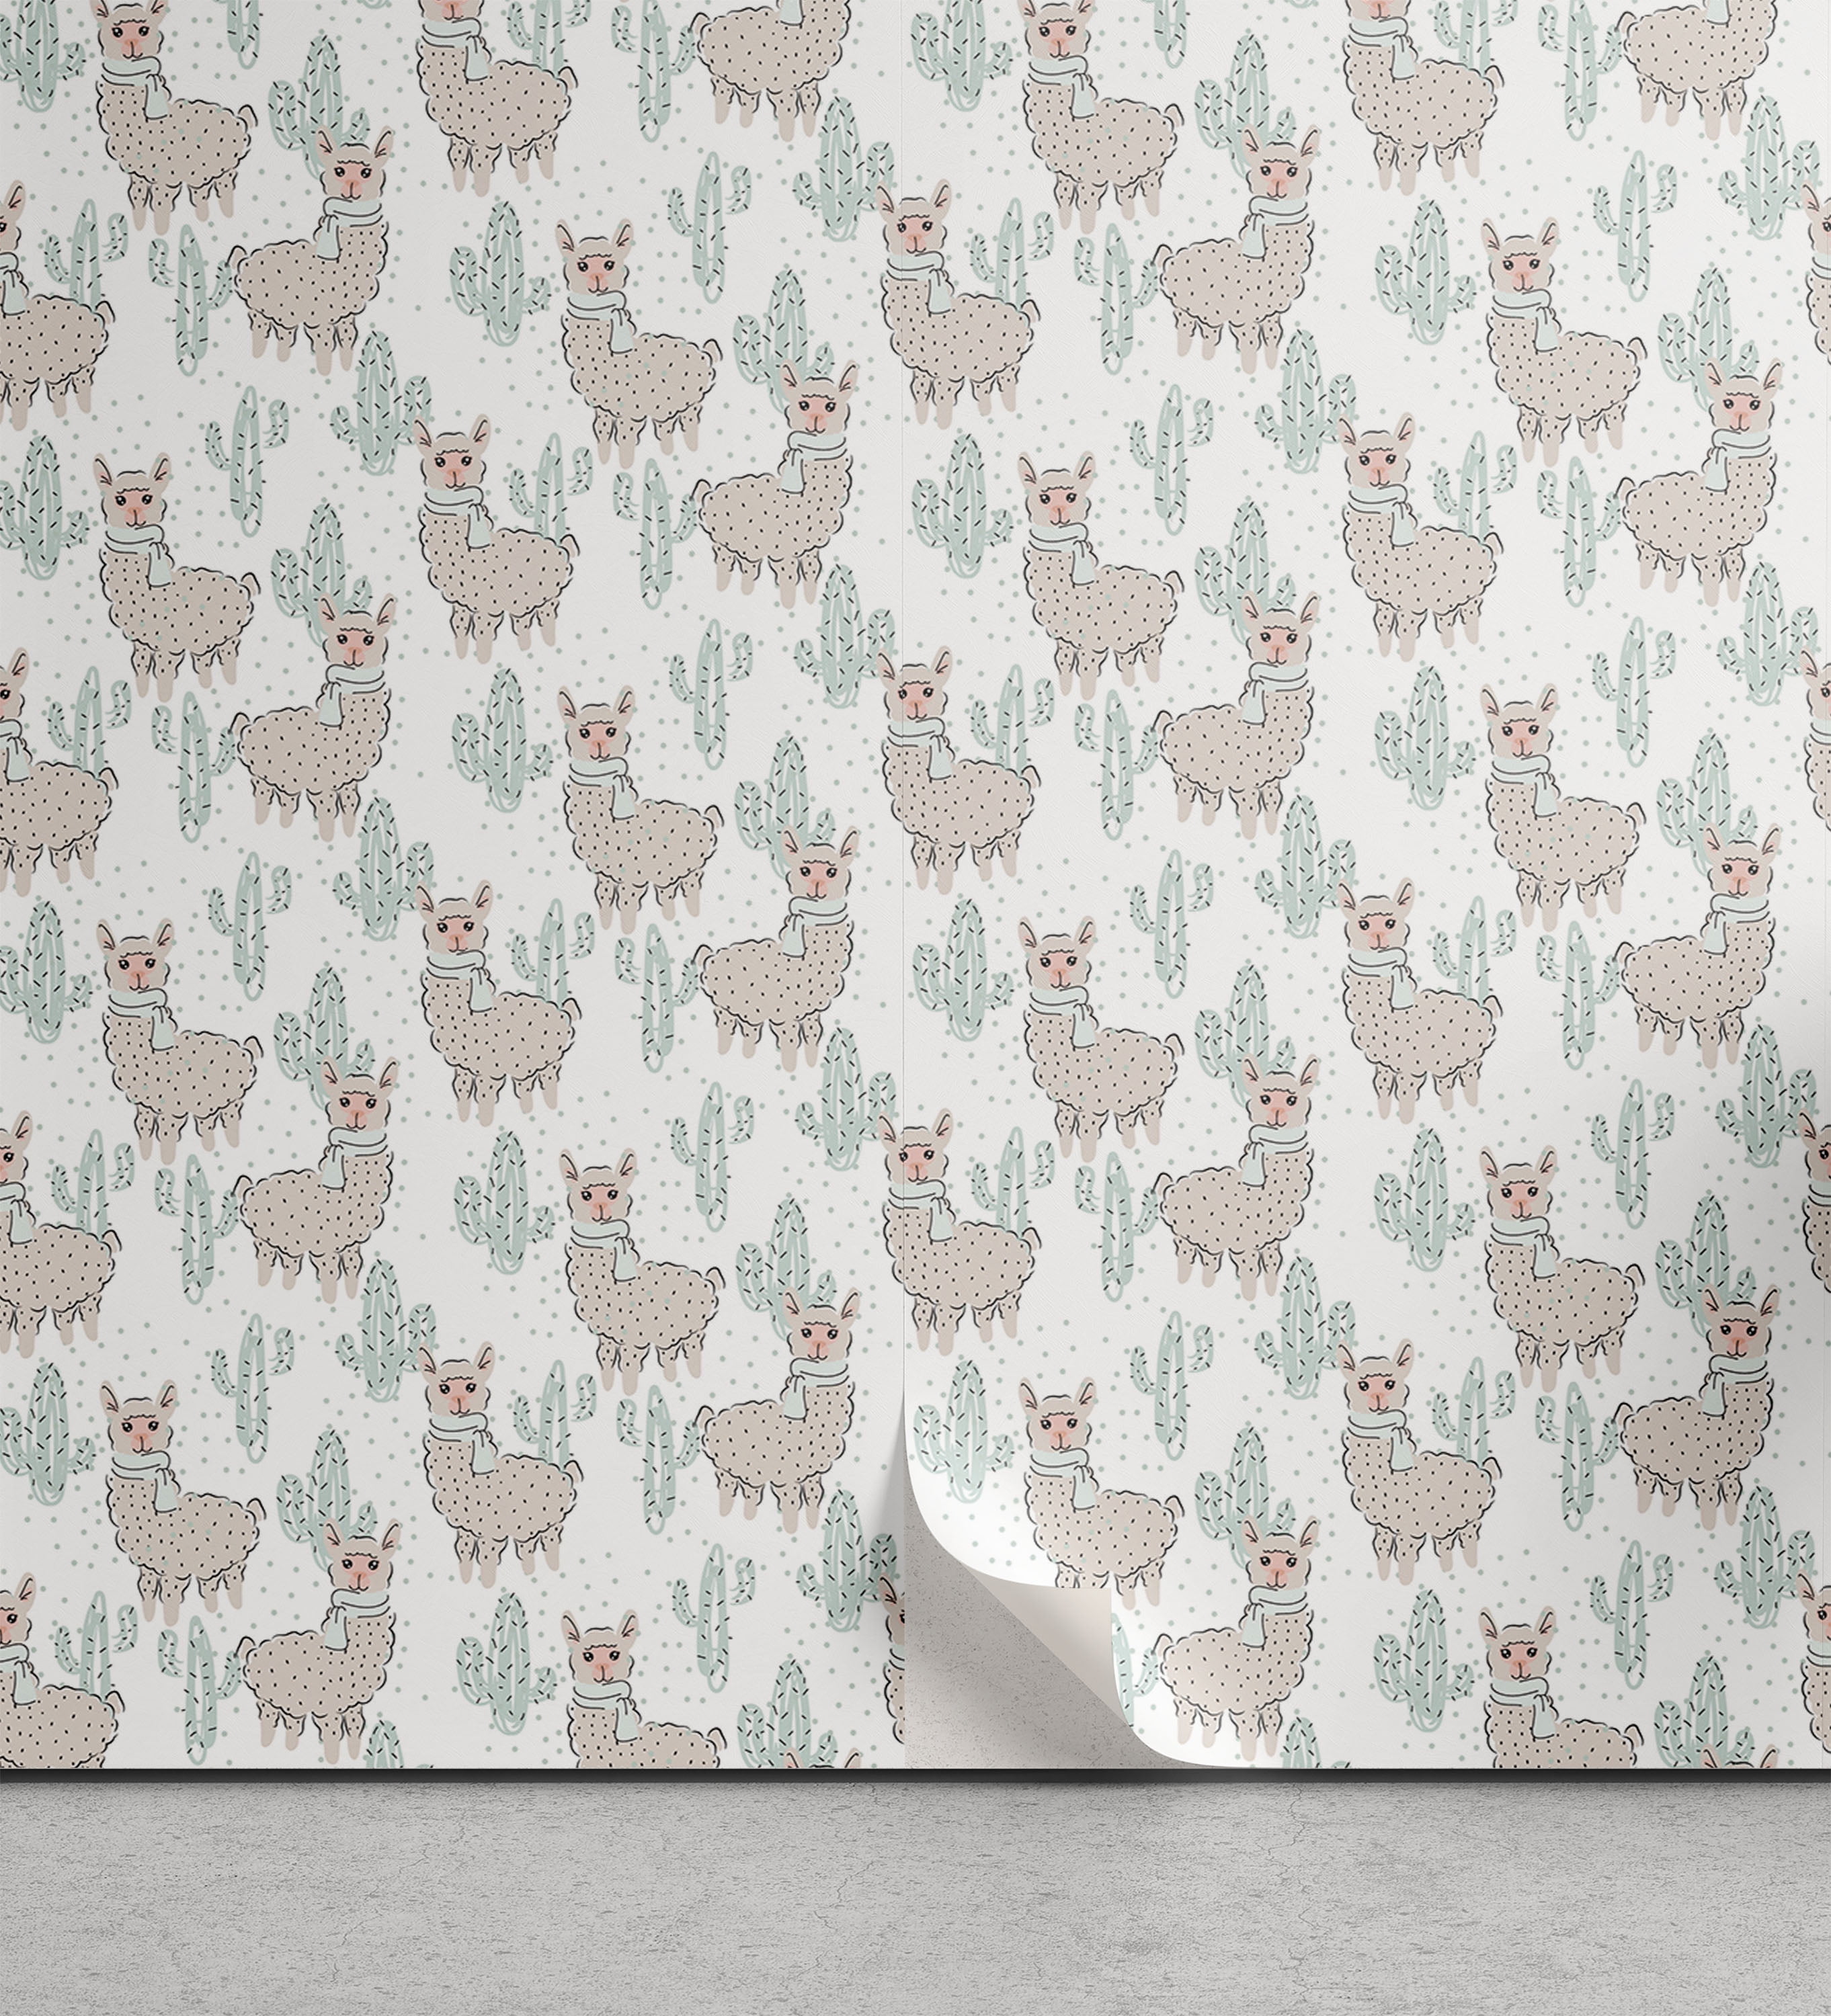 Animal Print Peel & Stick Wallpaper, Cartoon of Llama with Scarf and  Cactus, Self-Adhesive Living Room Kitchen Accent, 3 Sizes, Eggshell Blue,  by Ambesonne 